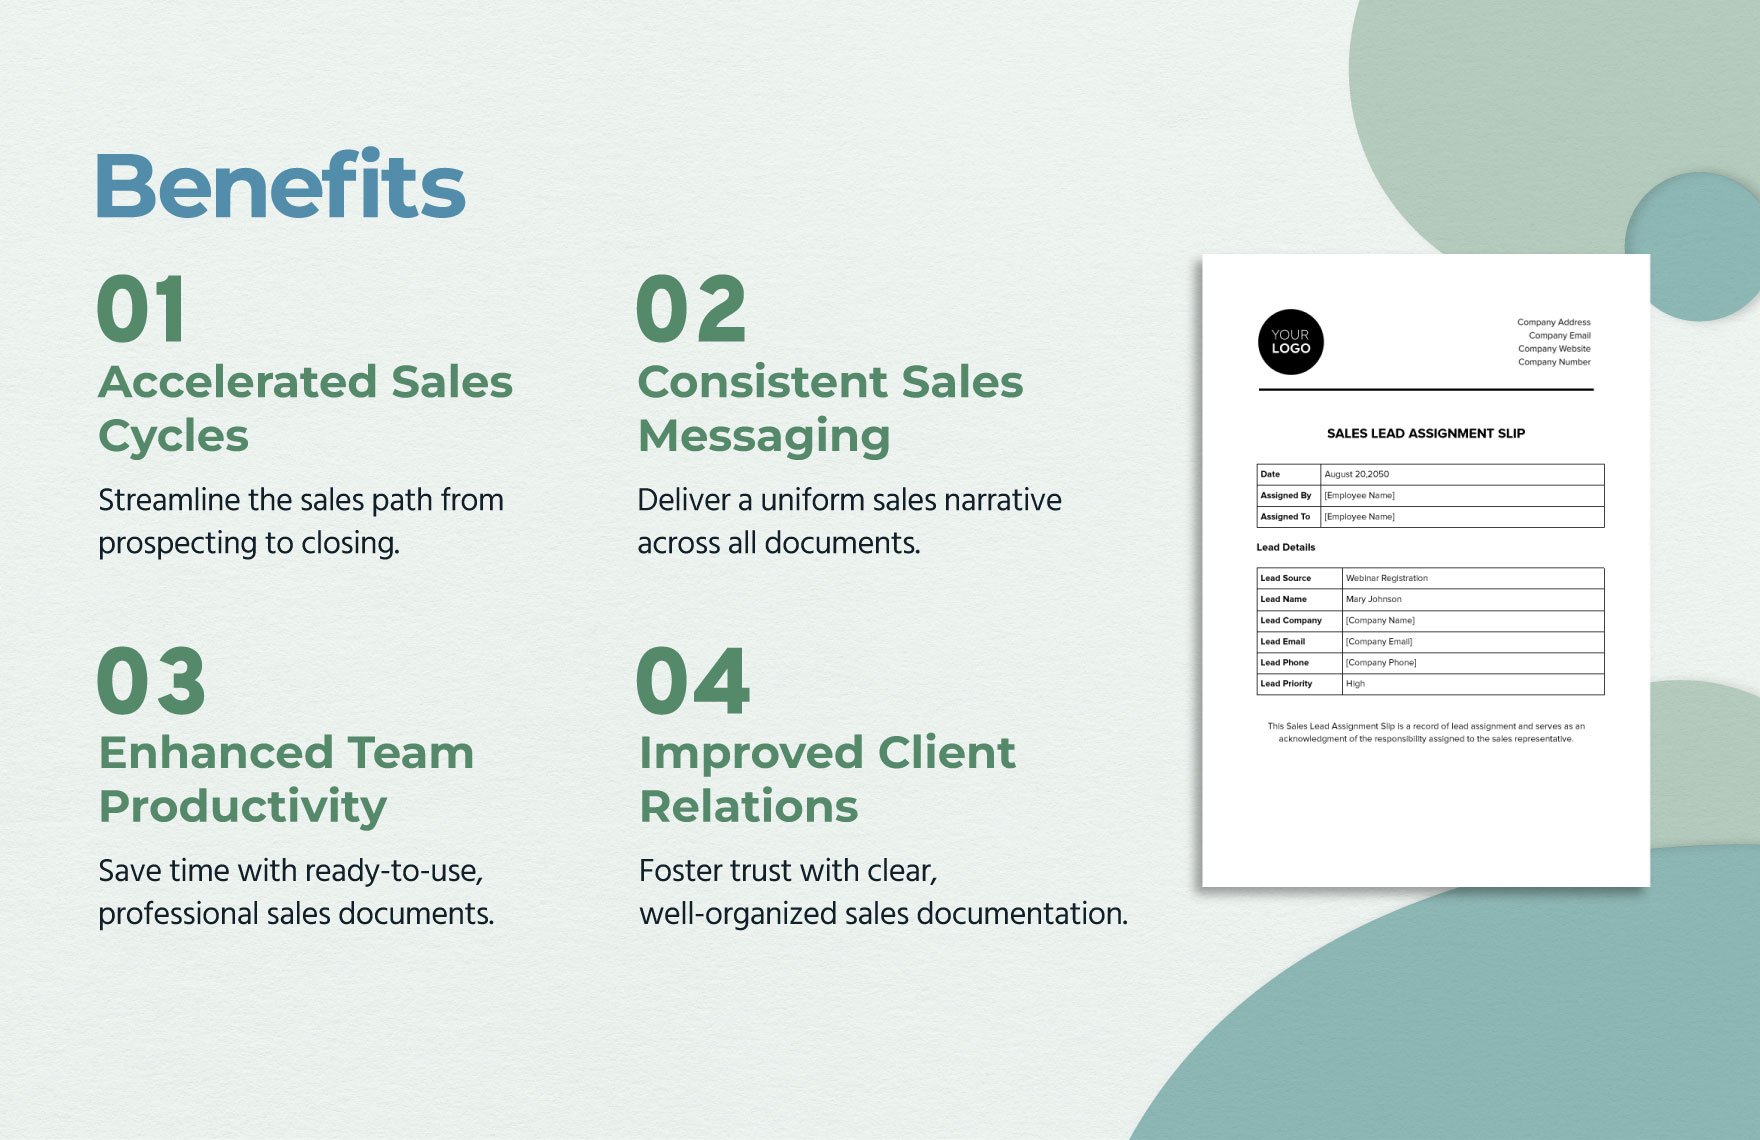 Sales Lead Assignment Slip Template